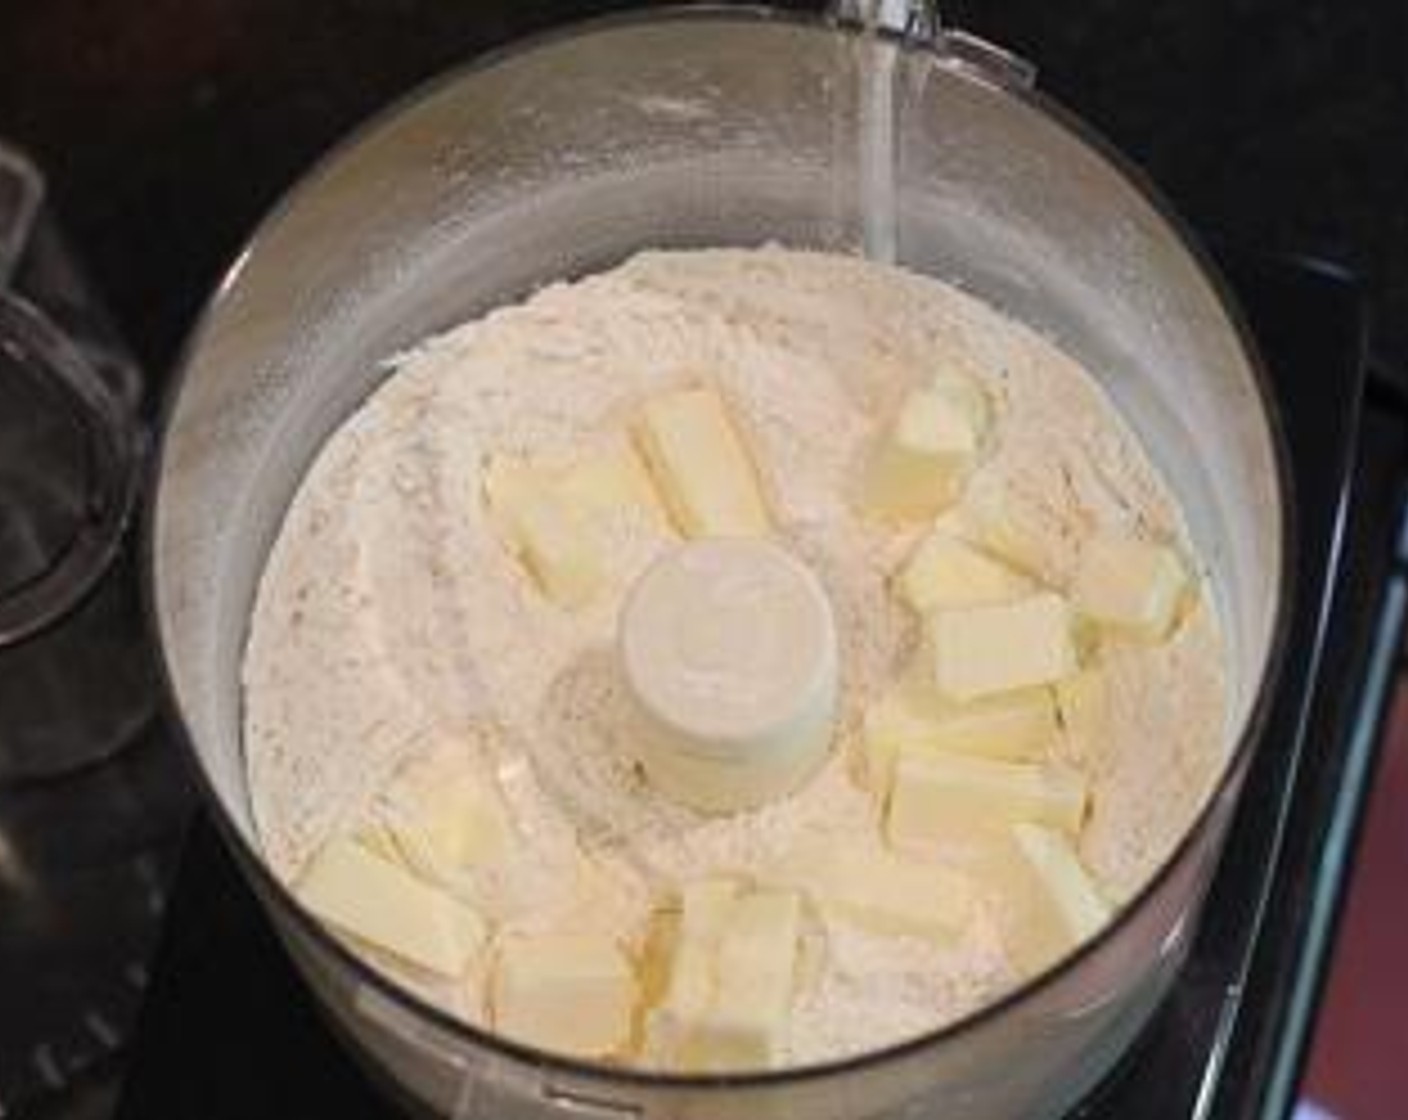 step 2 Whisk together All-Purpose Flour (2 cups), Baking Powder (1/2 Tbsp), Baking Soda (1/4 tsp), and Coarse Salt (1 tsp) in processor. Place Unsalted Butter (1/2 cup) in processor and pulse until mixture resembles coarse meal.